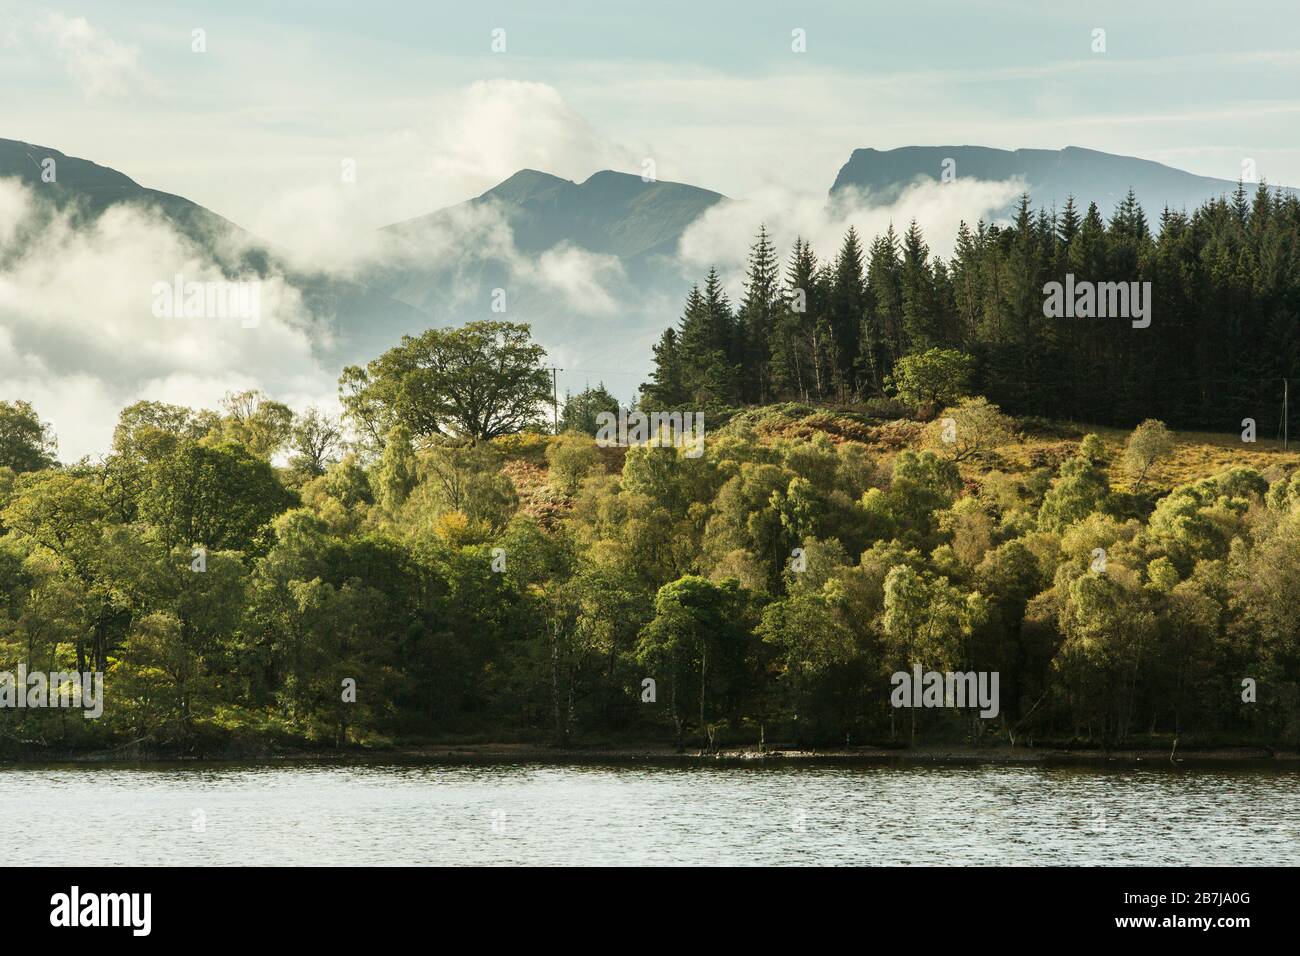 The North Face of Ben Nevis, Britain's Highest Mountain, seen across Loch Lochy, with Caledonian Forest, in autumn, Gairlochy, Scotland, UK Stock Photo